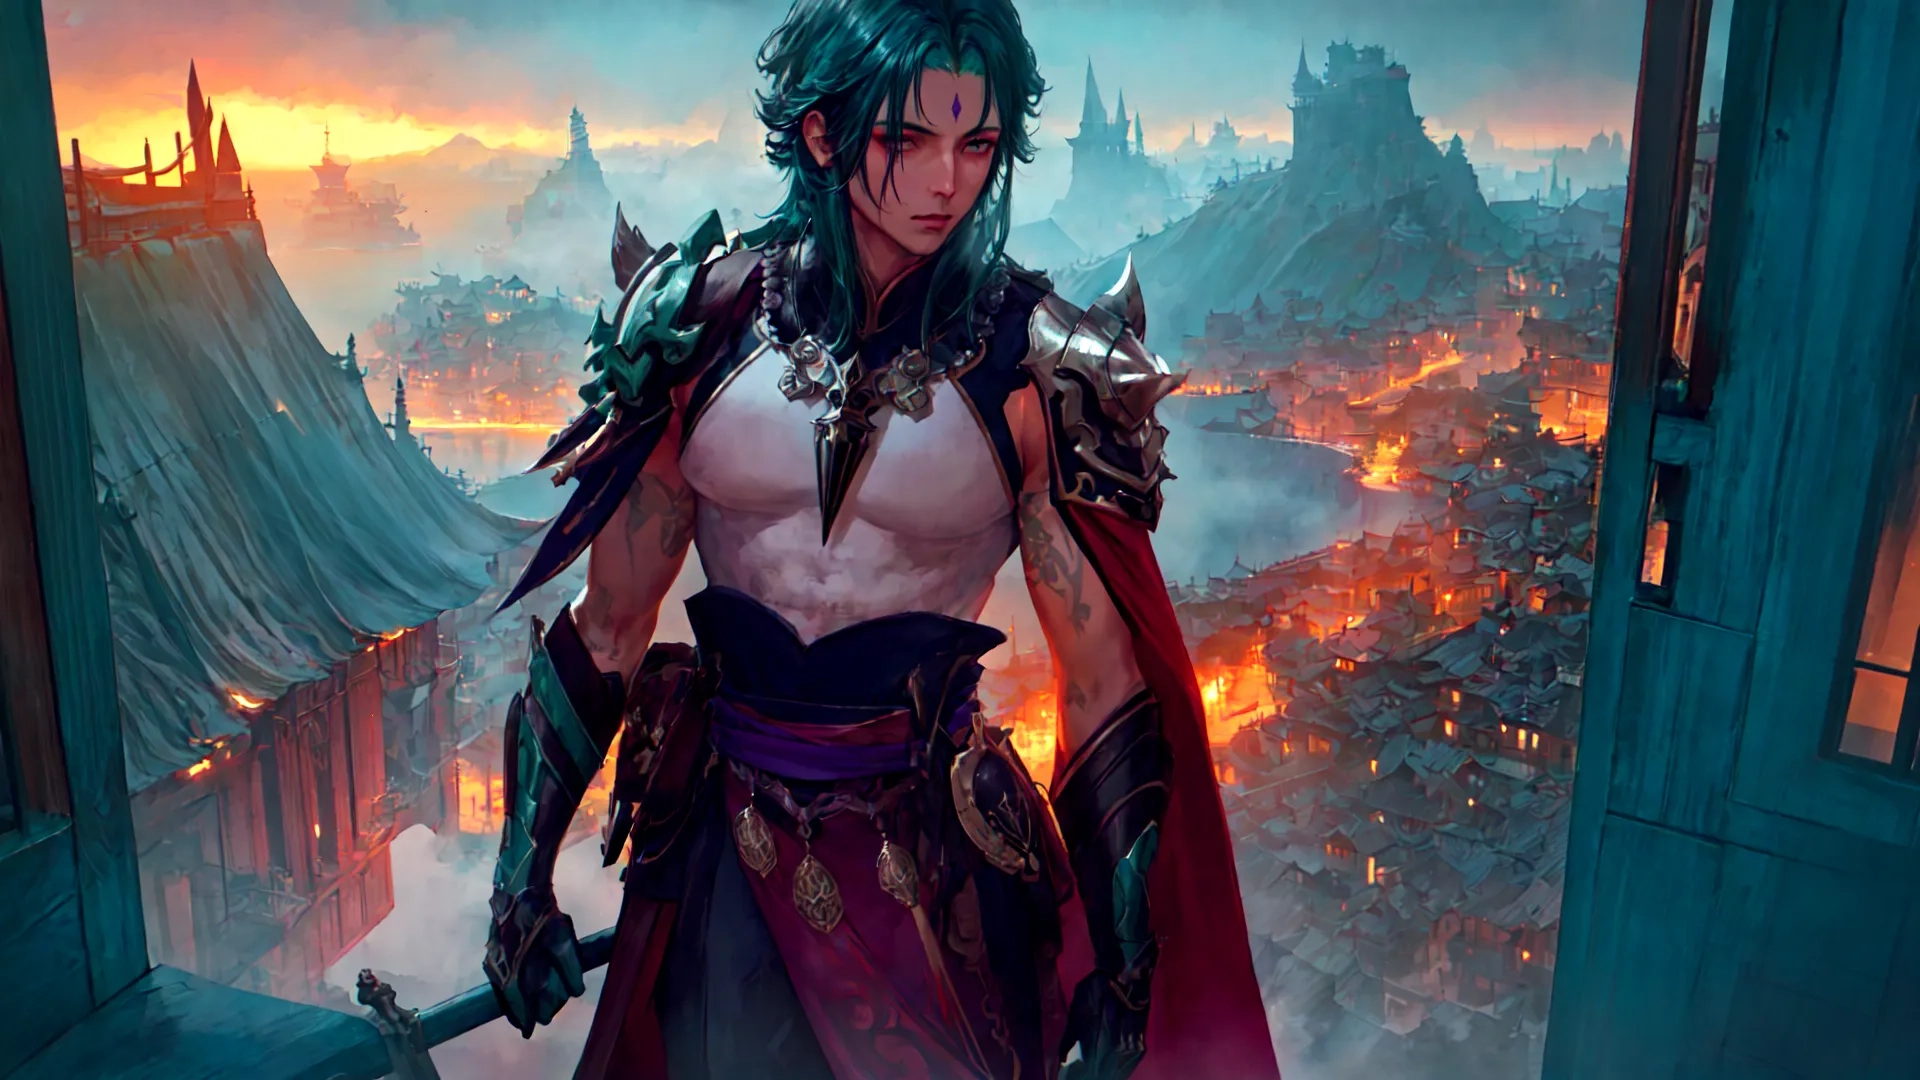 a man with green hair in a scene from a video game, the legend wears a colorful outfit with armor, and holds a sword for a flame on a city and is a city
